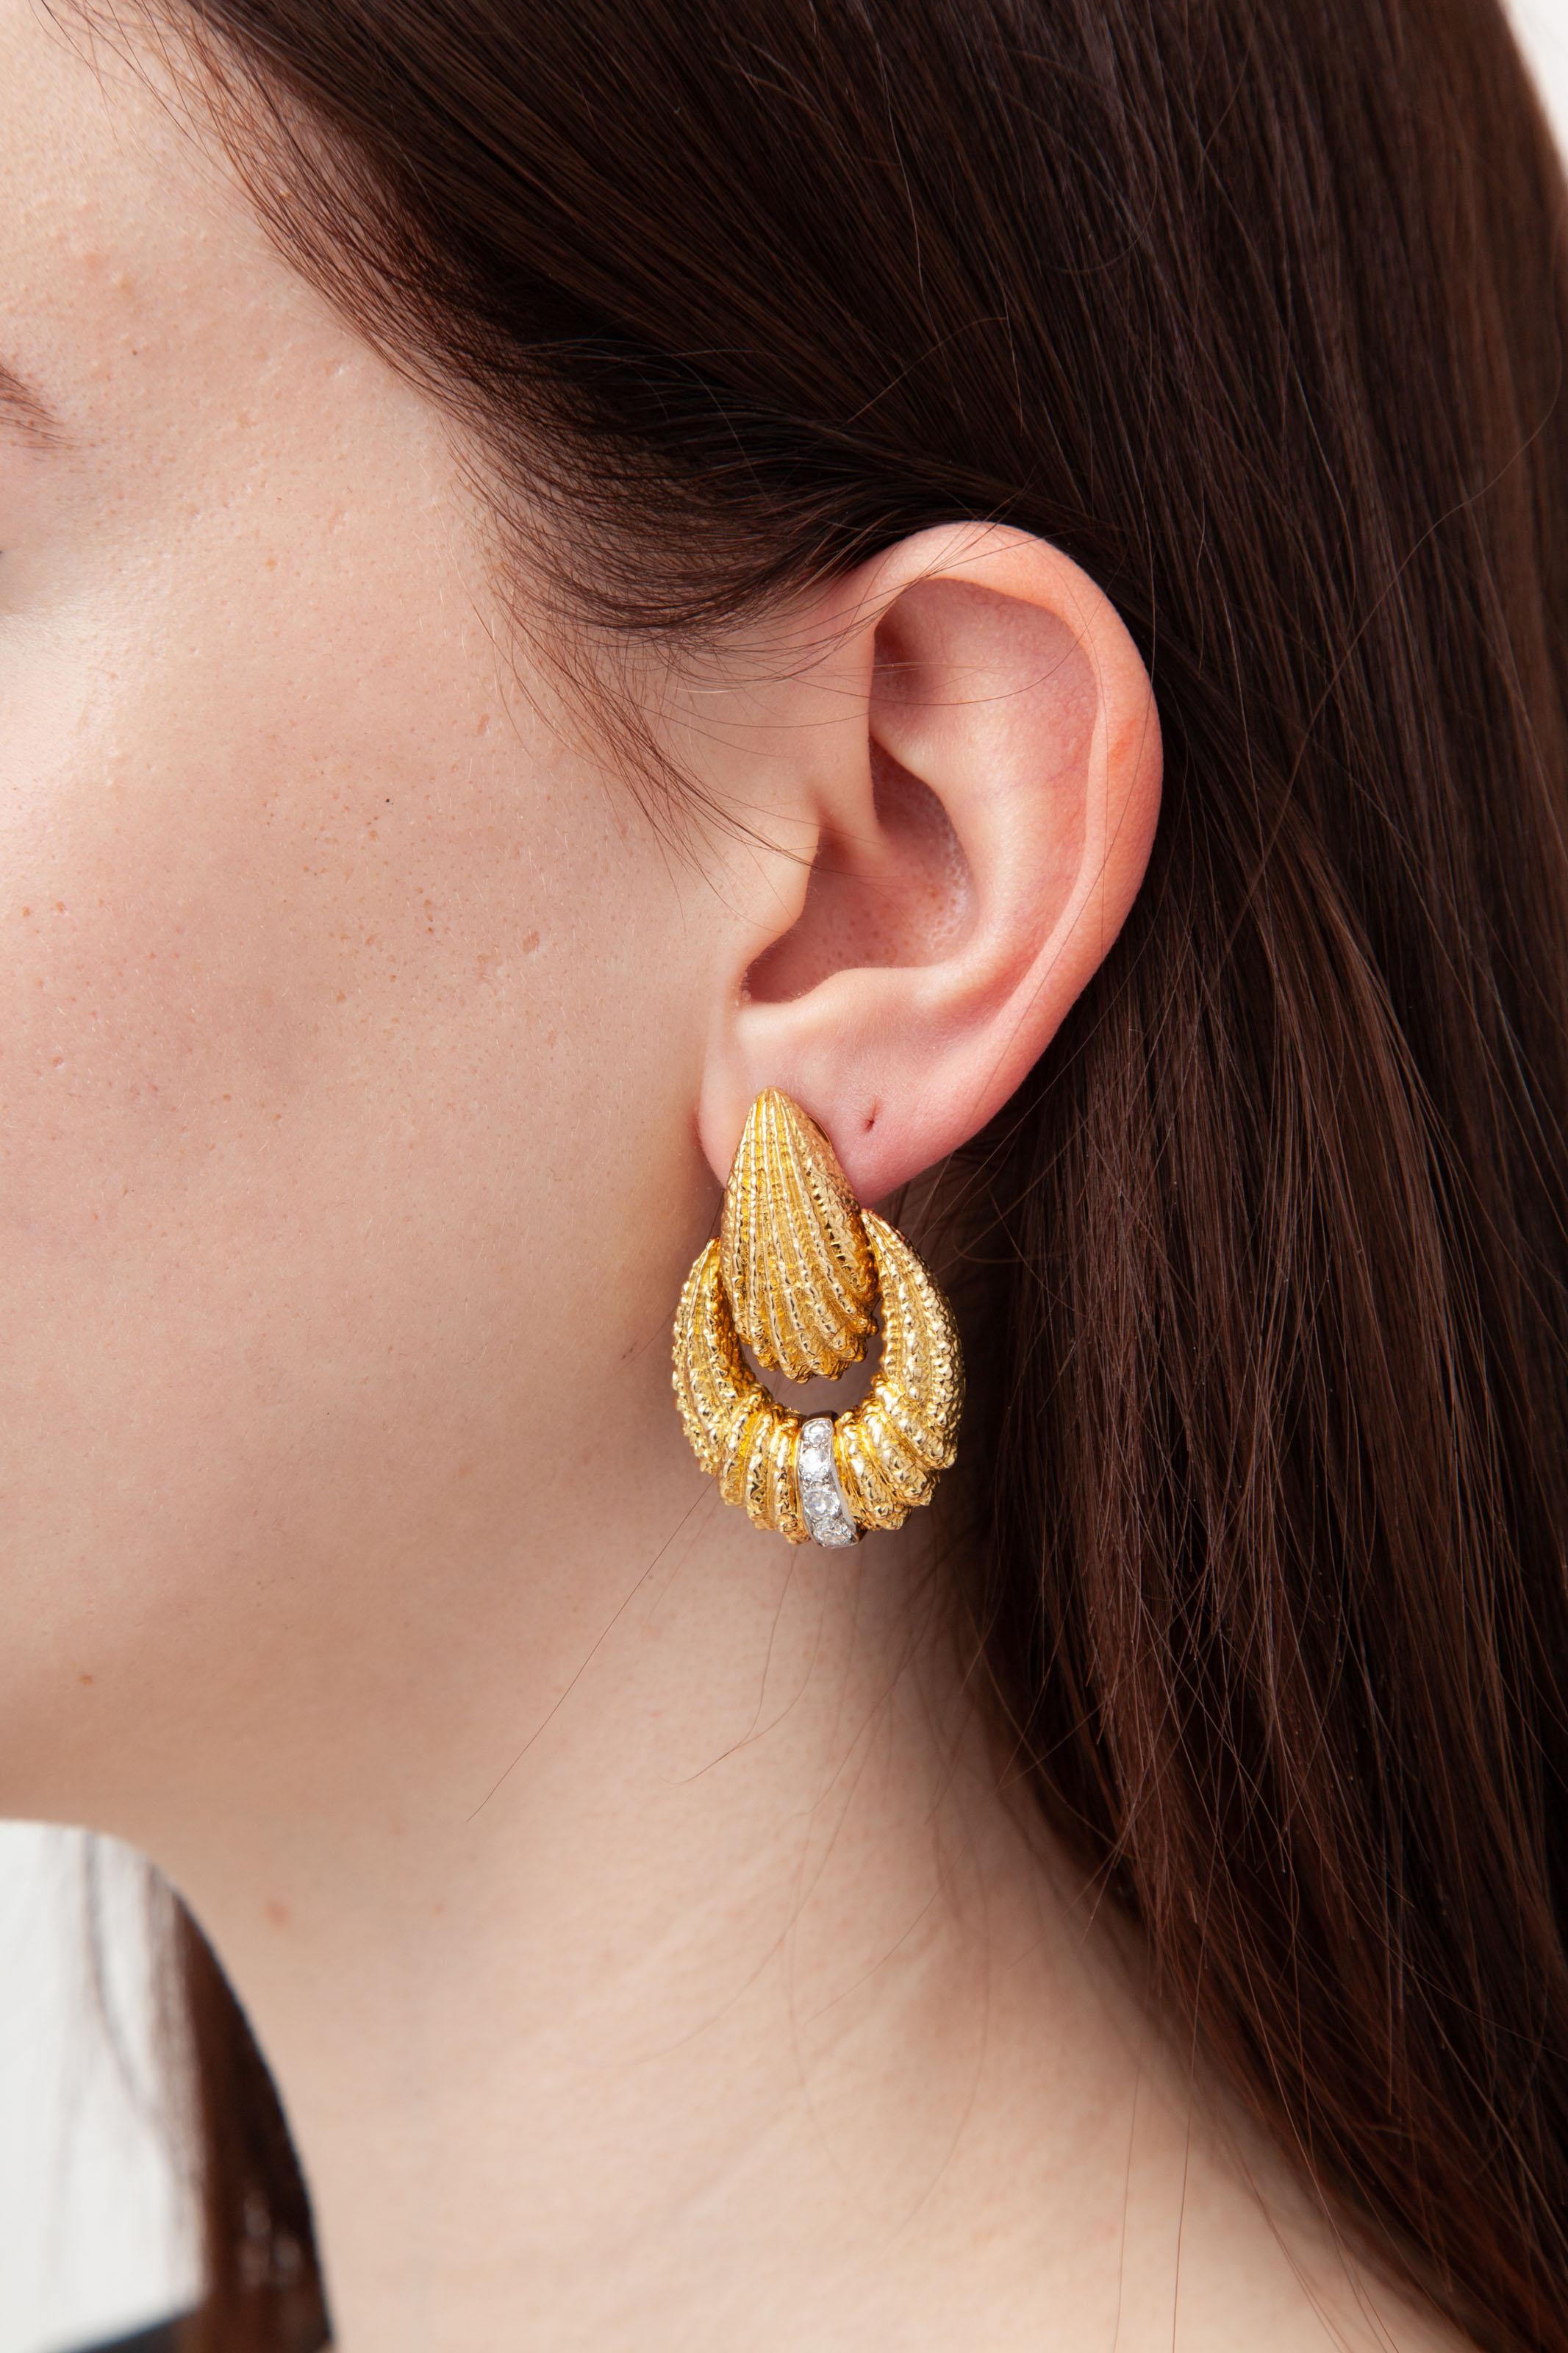 Van Cleef & Arpels Diamonds and 18kt Gold Earrings.
Elevate your style with these iconic Van Cleef & Arpels diamond and 18kt yellow gold earrings. In great condition, signed '750' V.C.A. and B3007R2. A touch of luxury made in France in the early